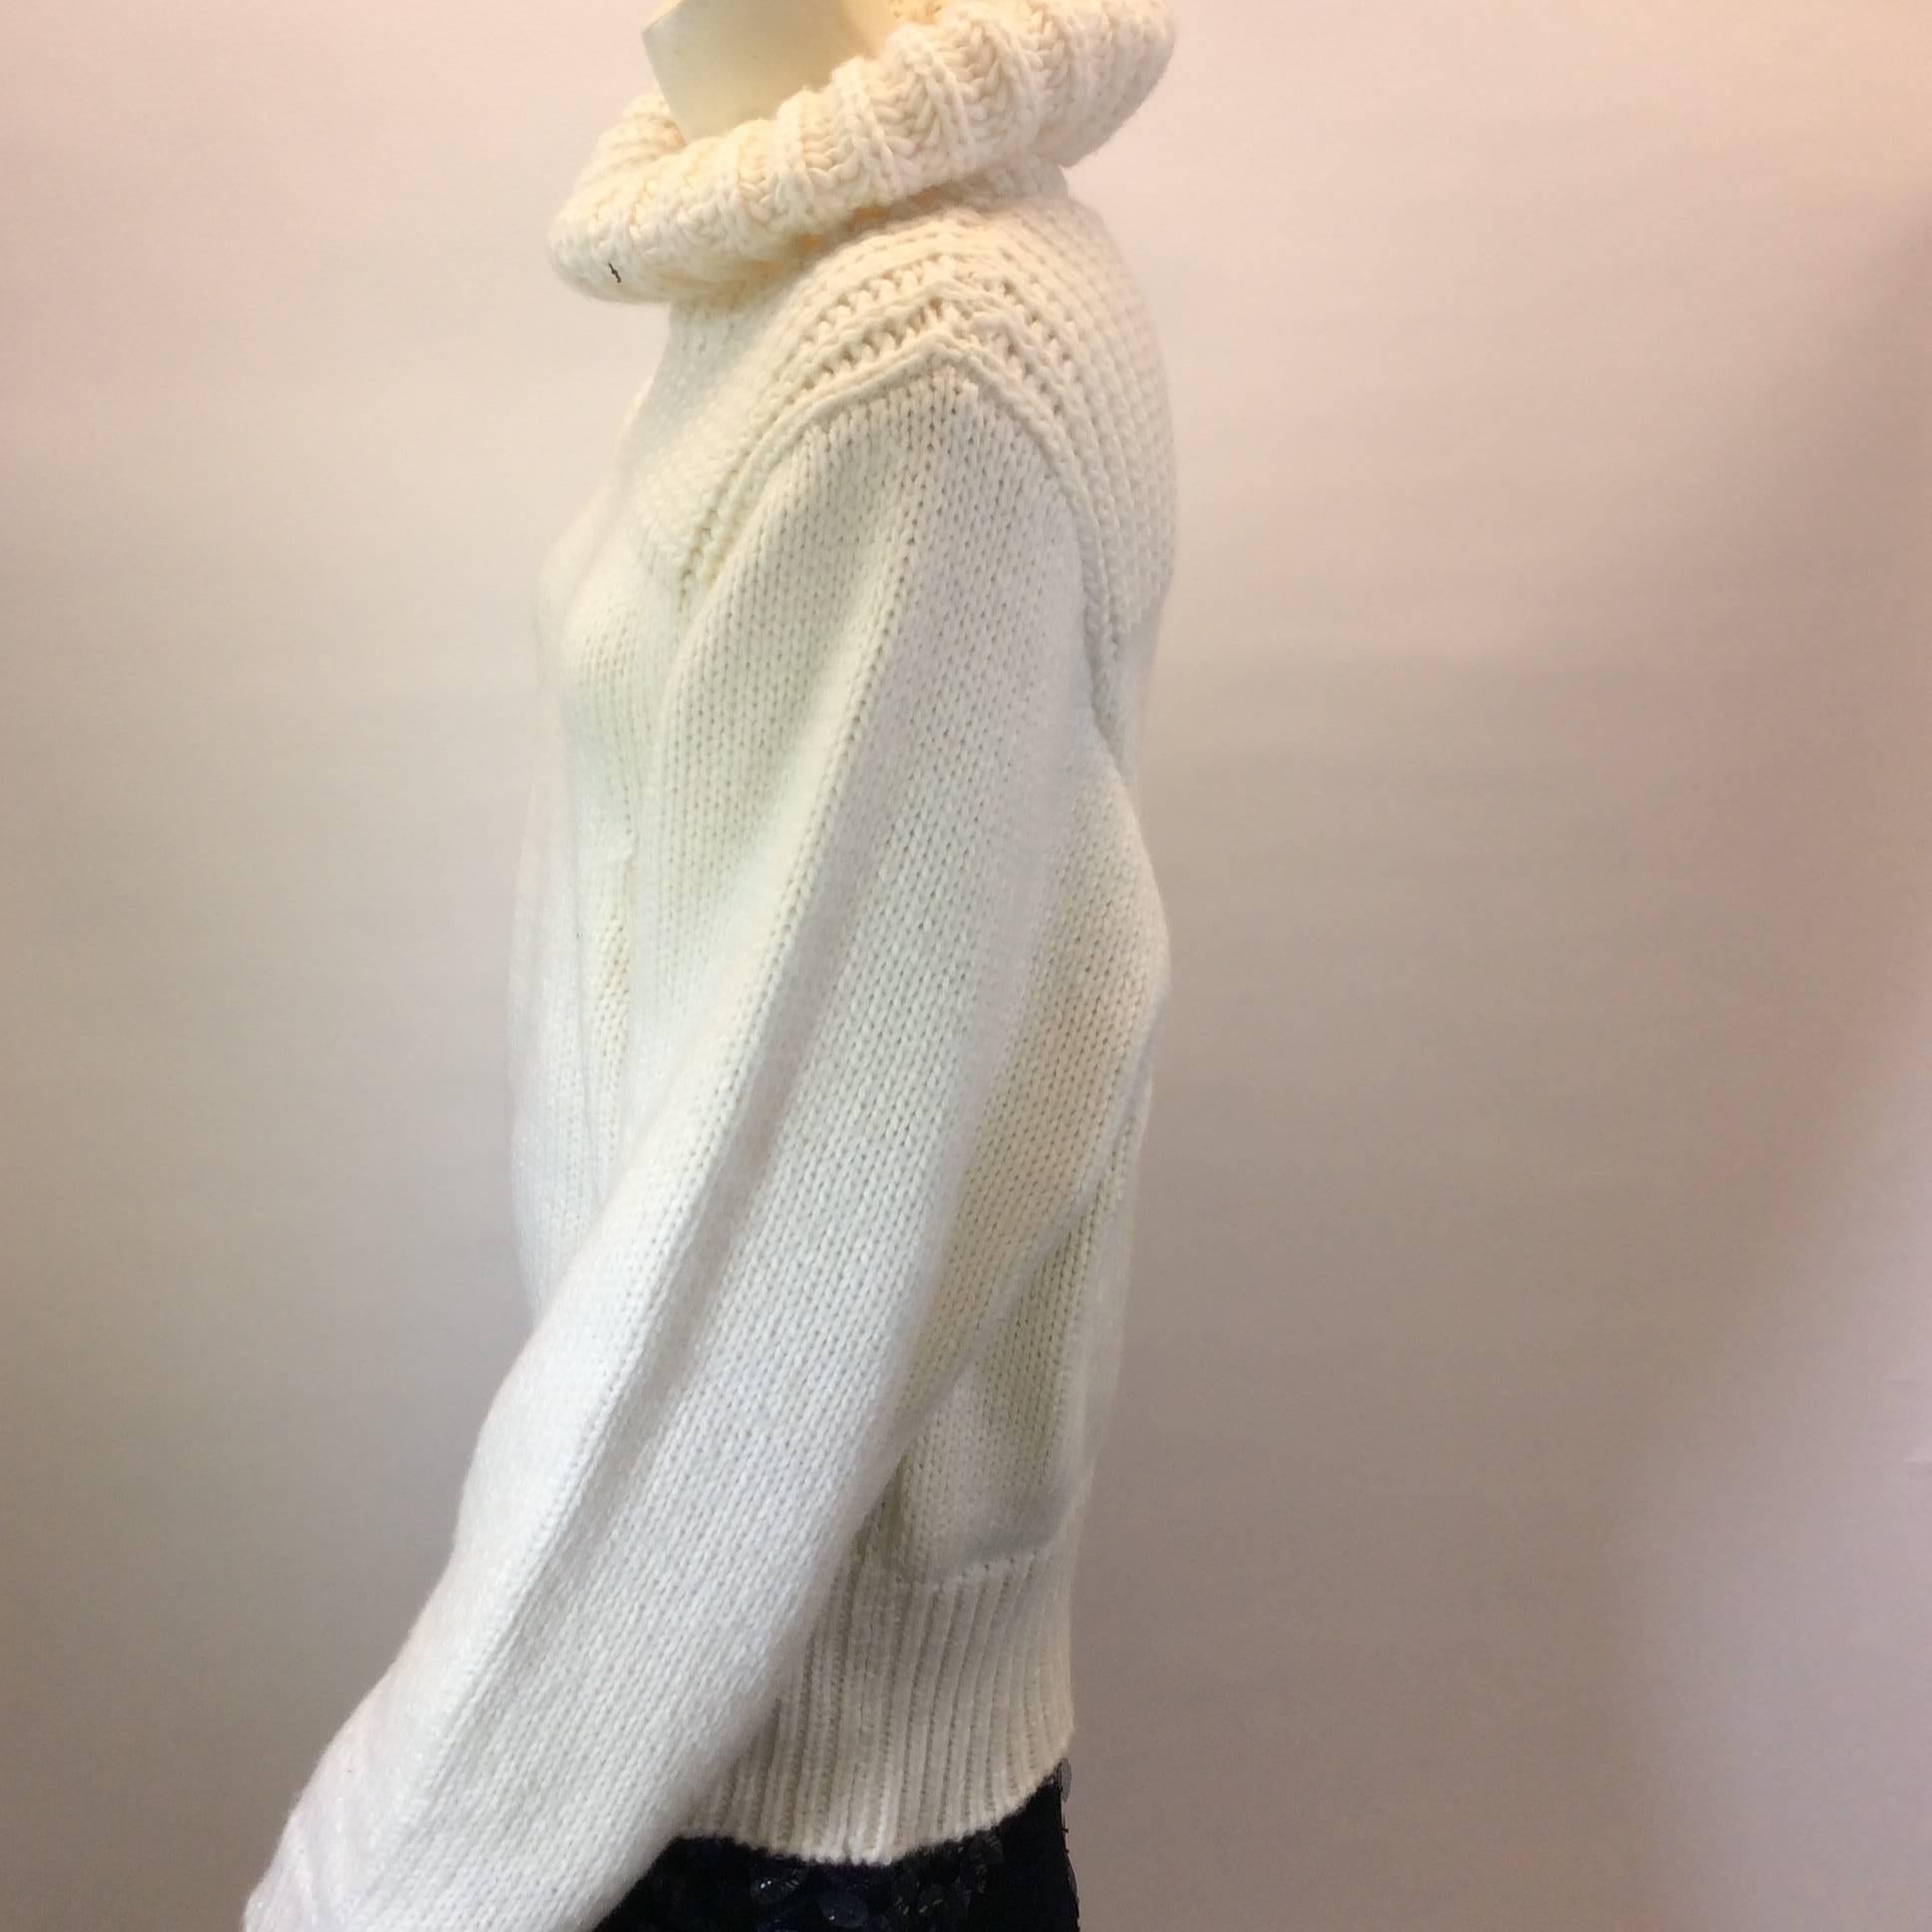 White Chunky Knit Sweater with High Neck
Features decorative ribbing around collar and shoulders
Size 40 (equates to US 10)
78% virgin wool, 22% Polyamide